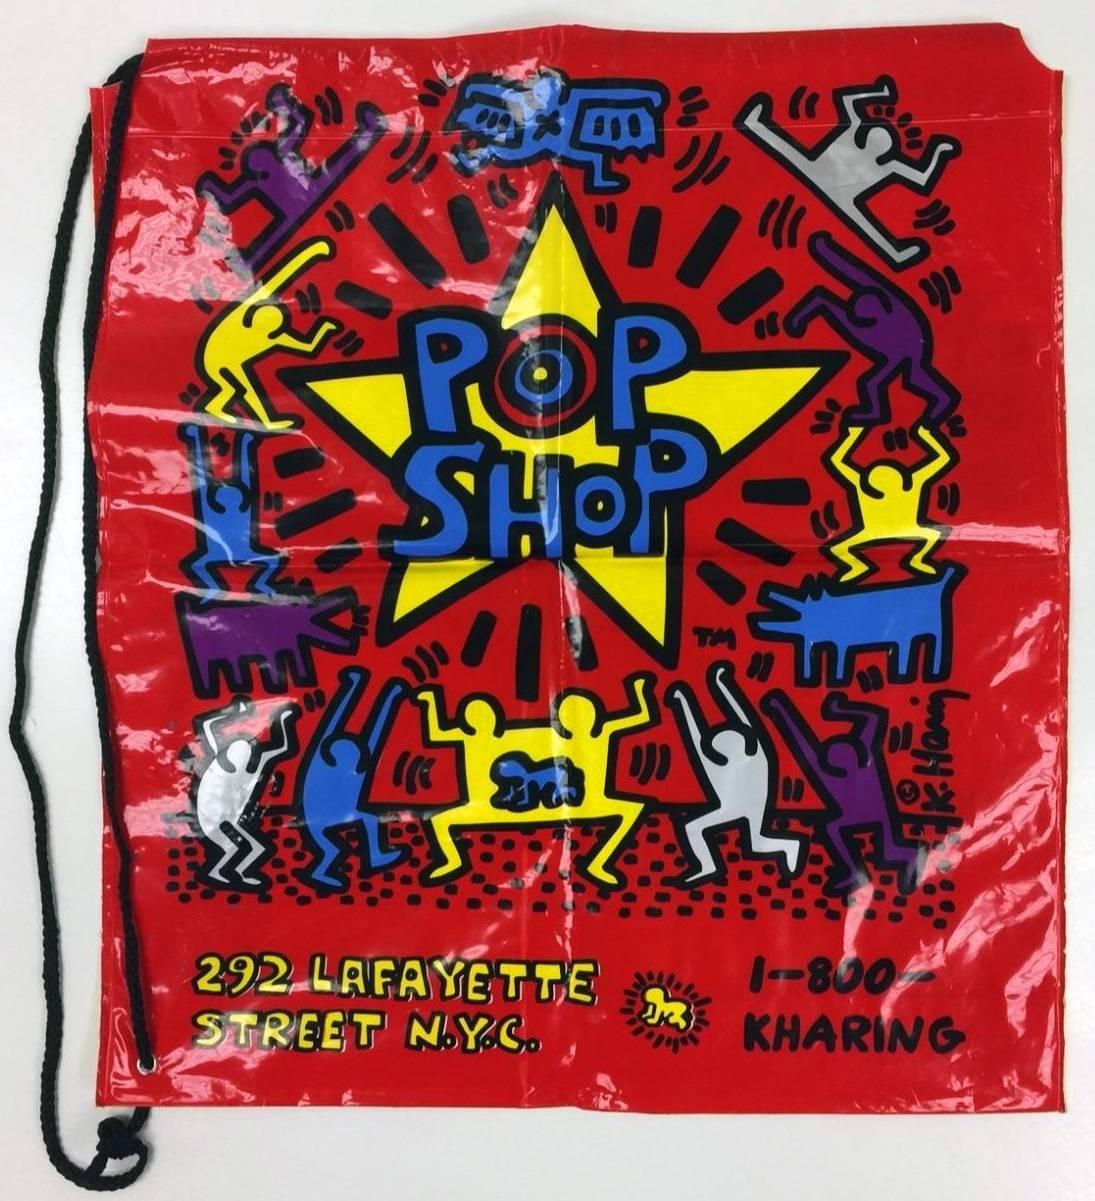 Vintage Keith Haring Pop Shop bag
Fantastic double-sided frame piece rich with color. Features a bold haring printed signature on lower right of front as well as the iconic Haring Pop Shop logo. 

Some minor wear commensurate with medium;